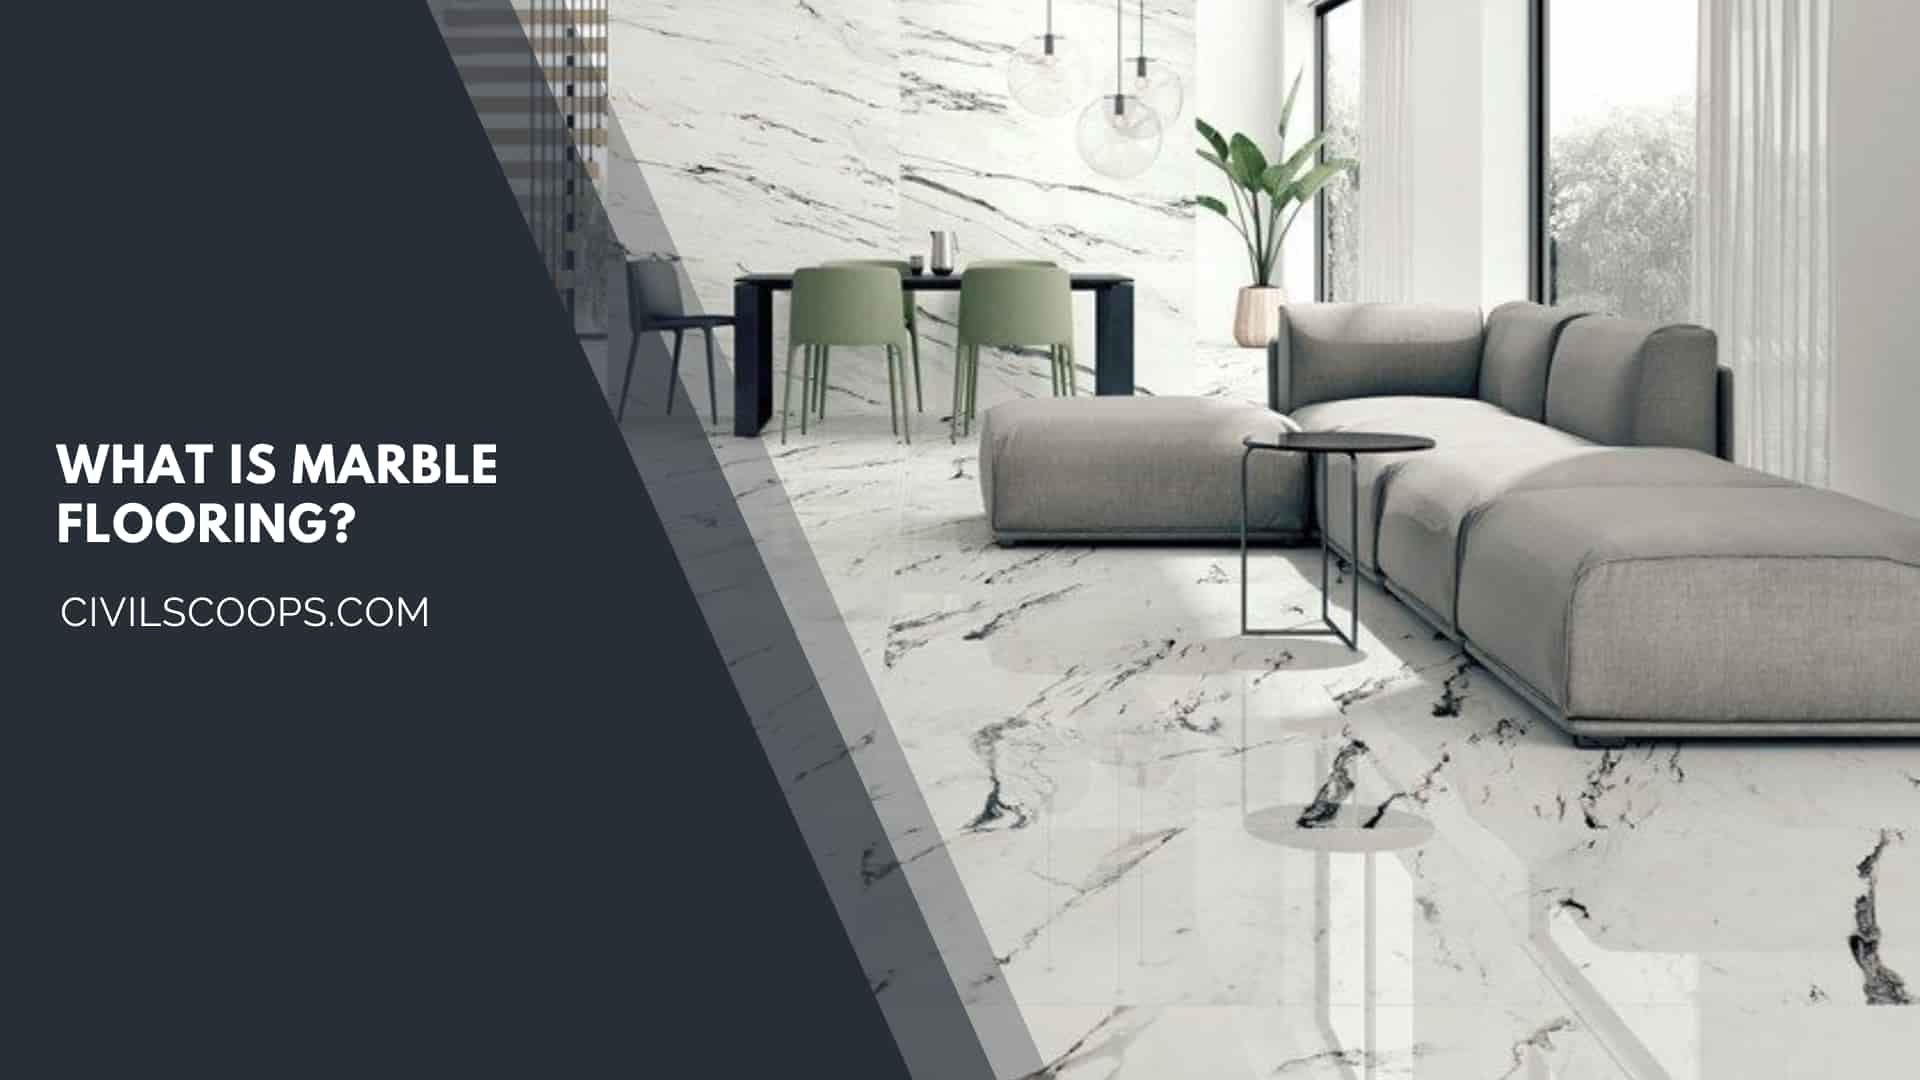 What Is Marble Flooring?